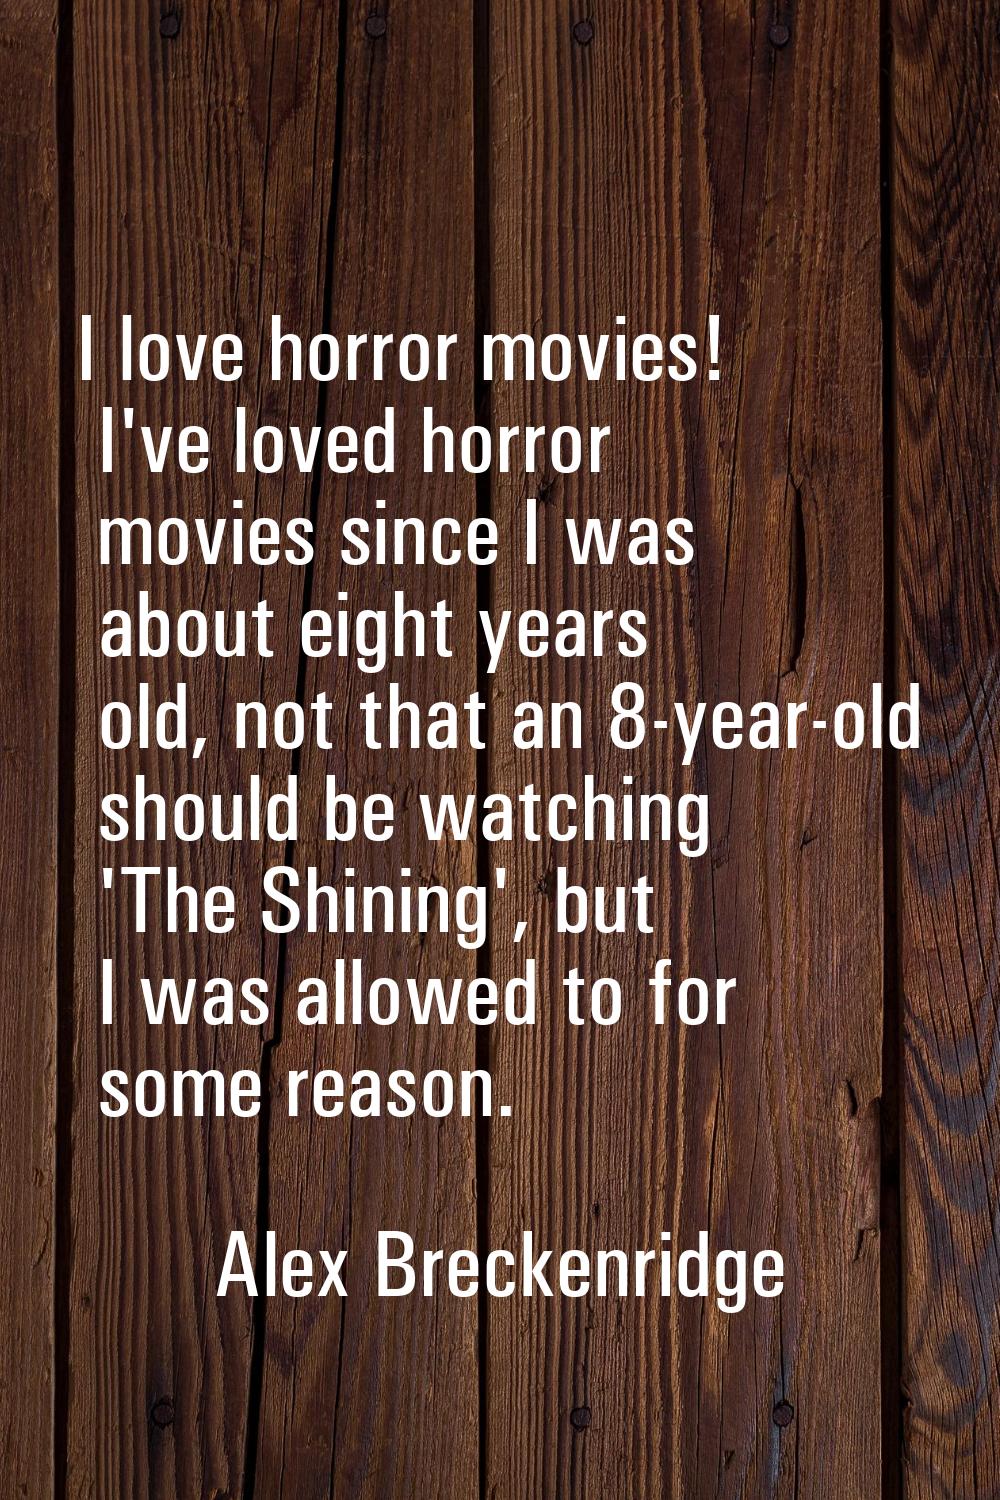 I love horror movies! I've loved horror movies since I was about eight years old, not that an 8-yea